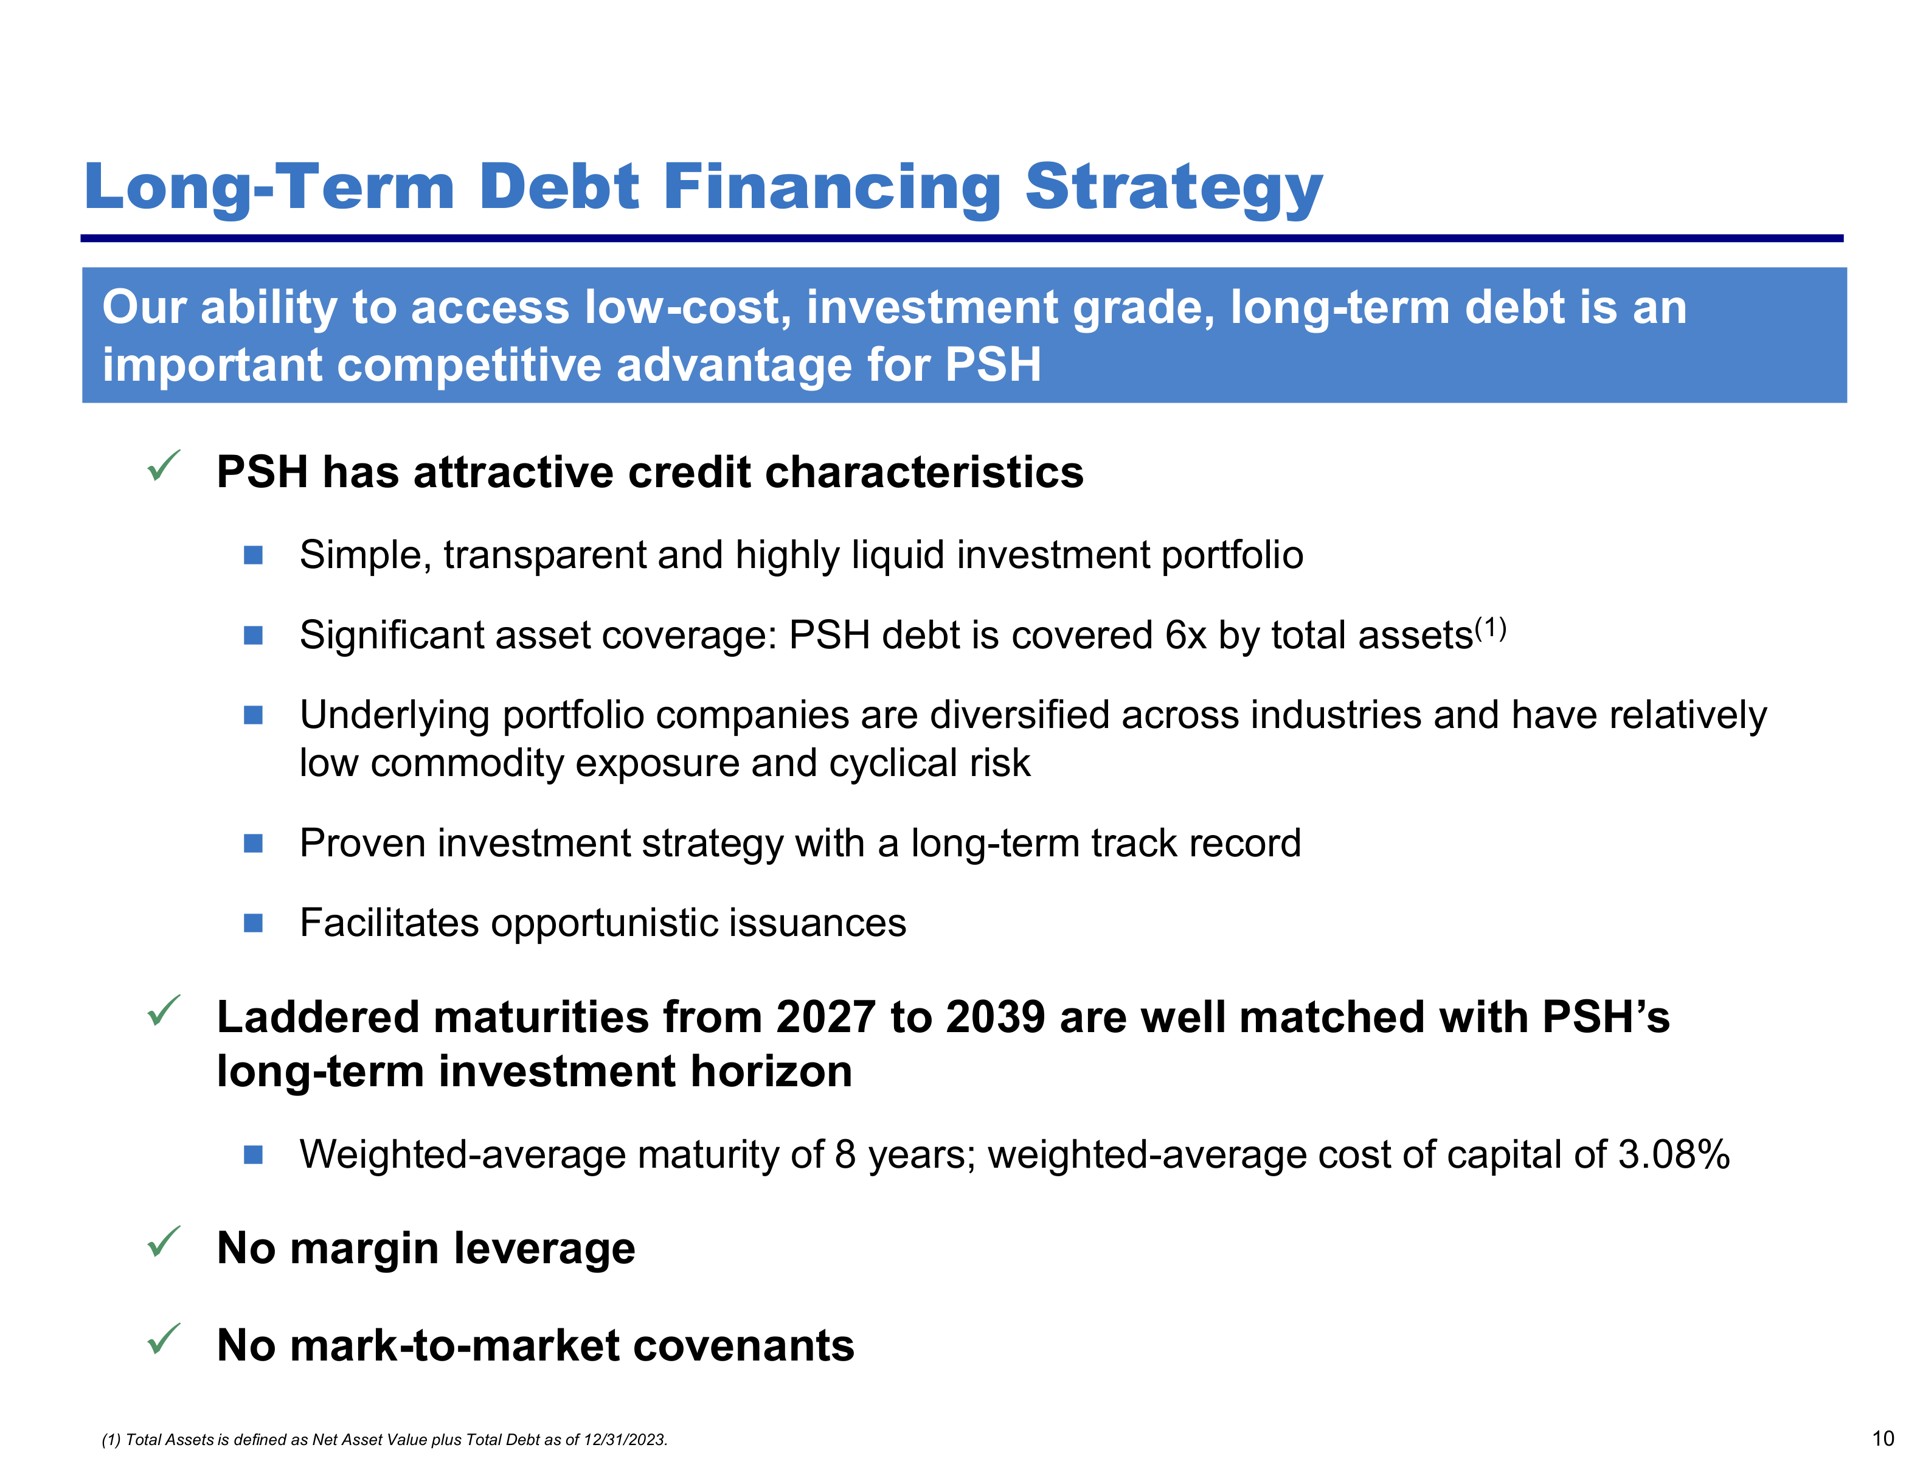 long term debt financing strategy our ability to access low cost investment grade long term debt is an important competitive advantage for has attractive credit characteristics laddered maturities from to are well matched with long term investment horizon no margin leverage no mark to market covenants | Pershing Square